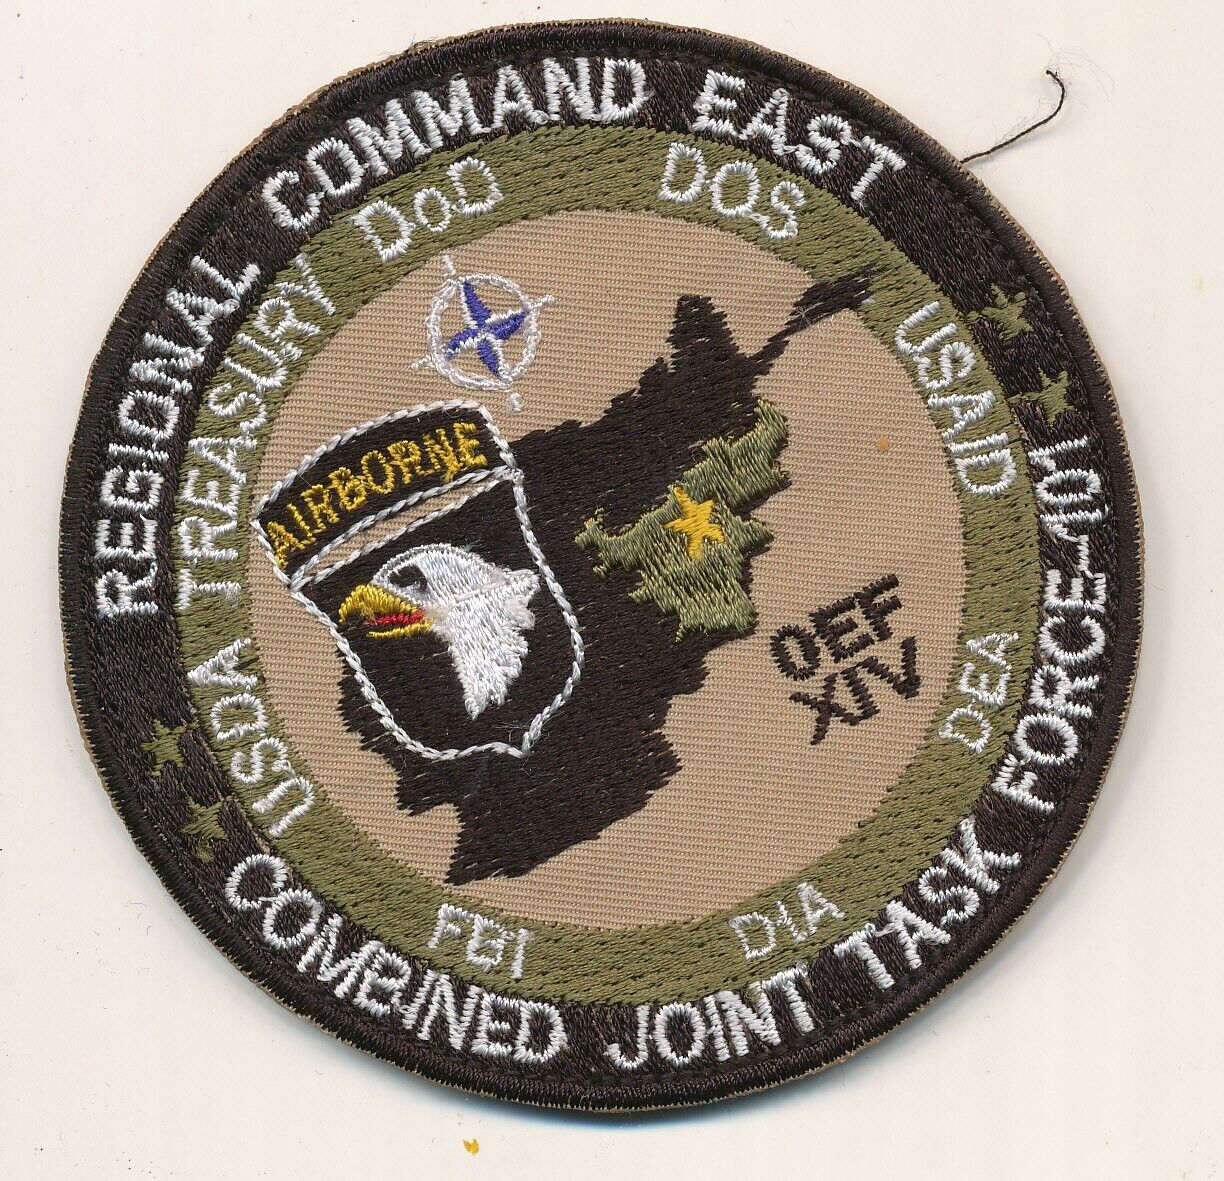 101st Airborne Regional Command East Joint Task Force 101 Afghanistan made